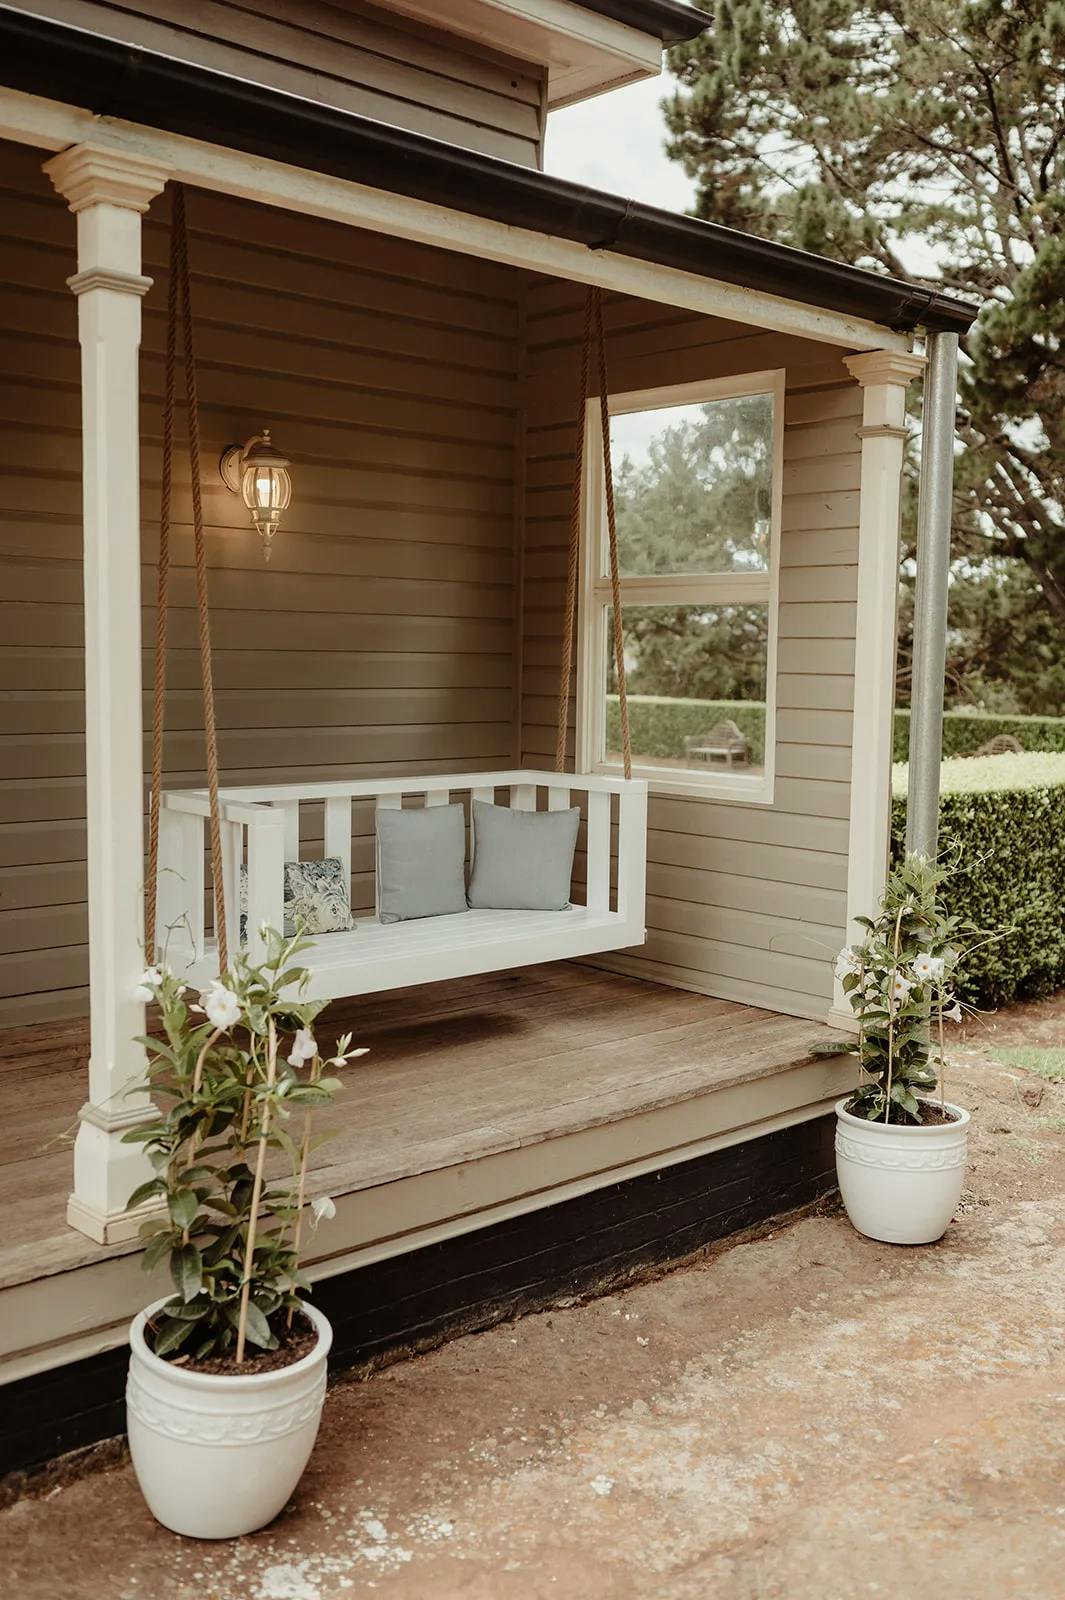 A cozy porch with a hanging white wooden bench swing adorned with gray cushions. Two potted plants with white flowers flank the entrance, and a lantern-style light fixture is mounted on the wall. The background features trees and greenery.